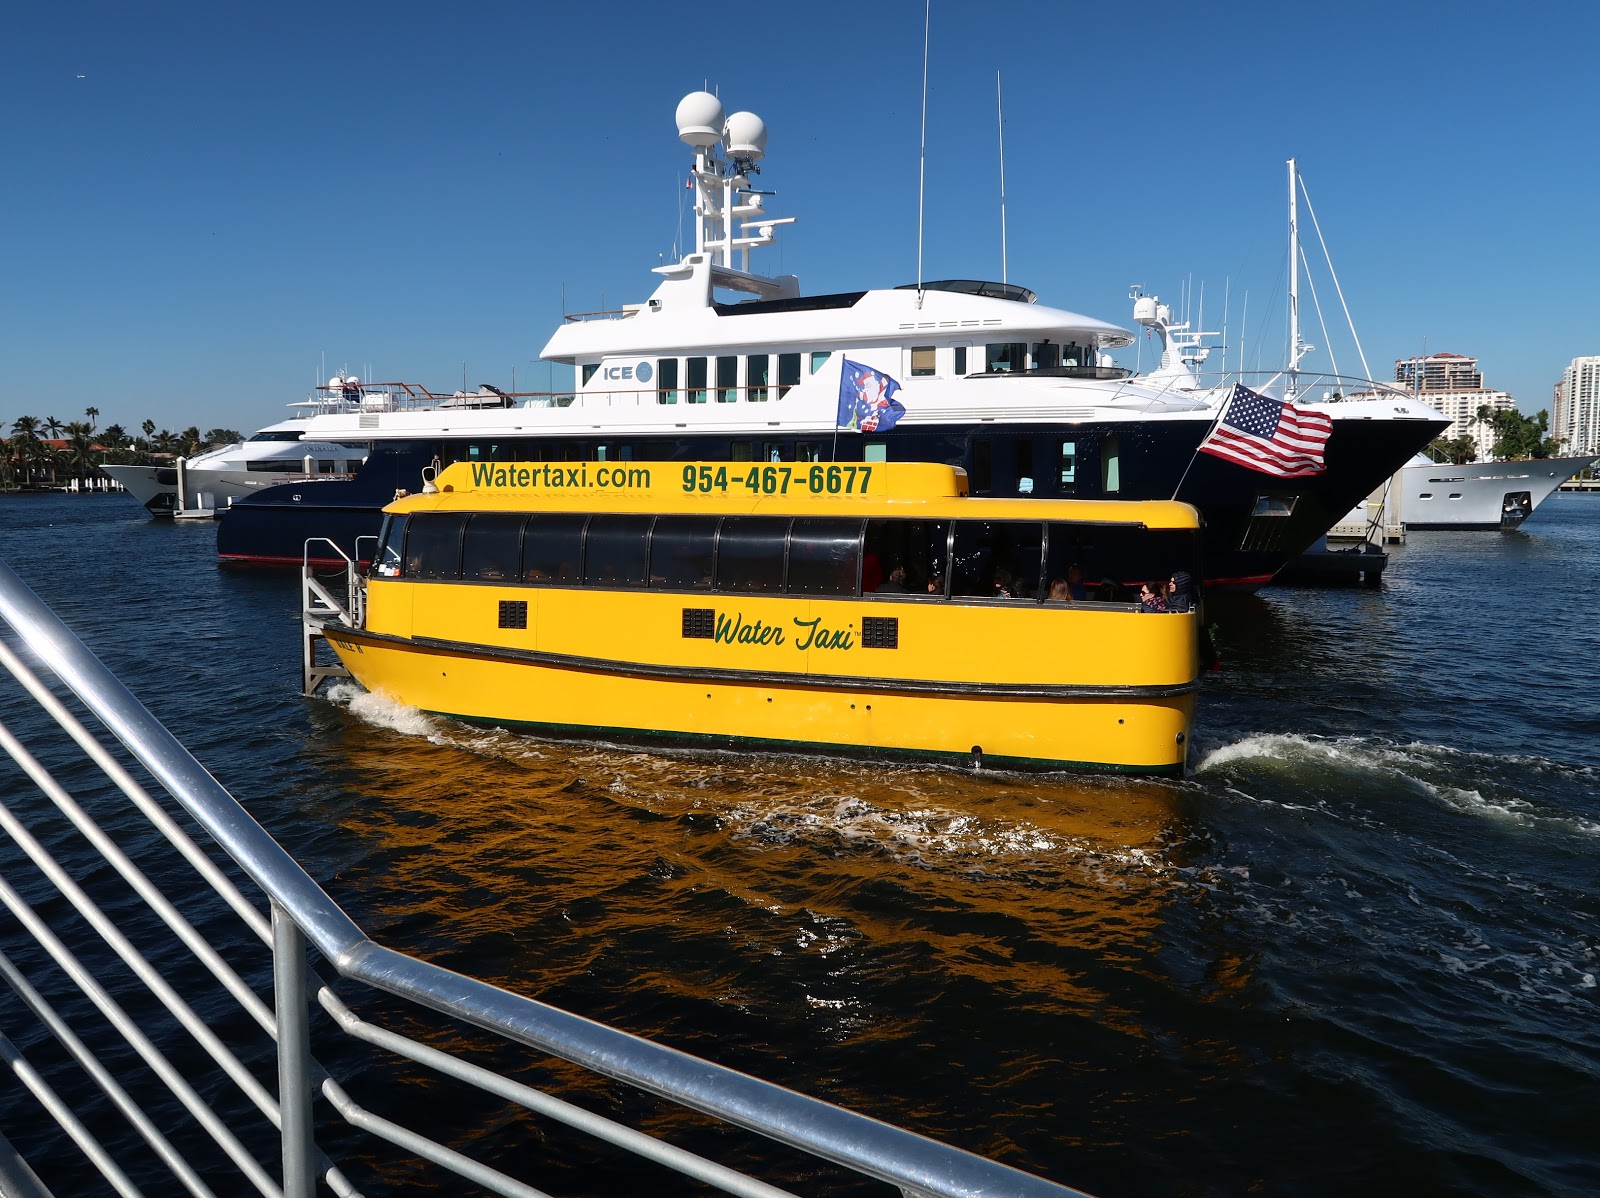 Where is Cookie? Fort Lauderdale's water taxi lures adventurer, sun